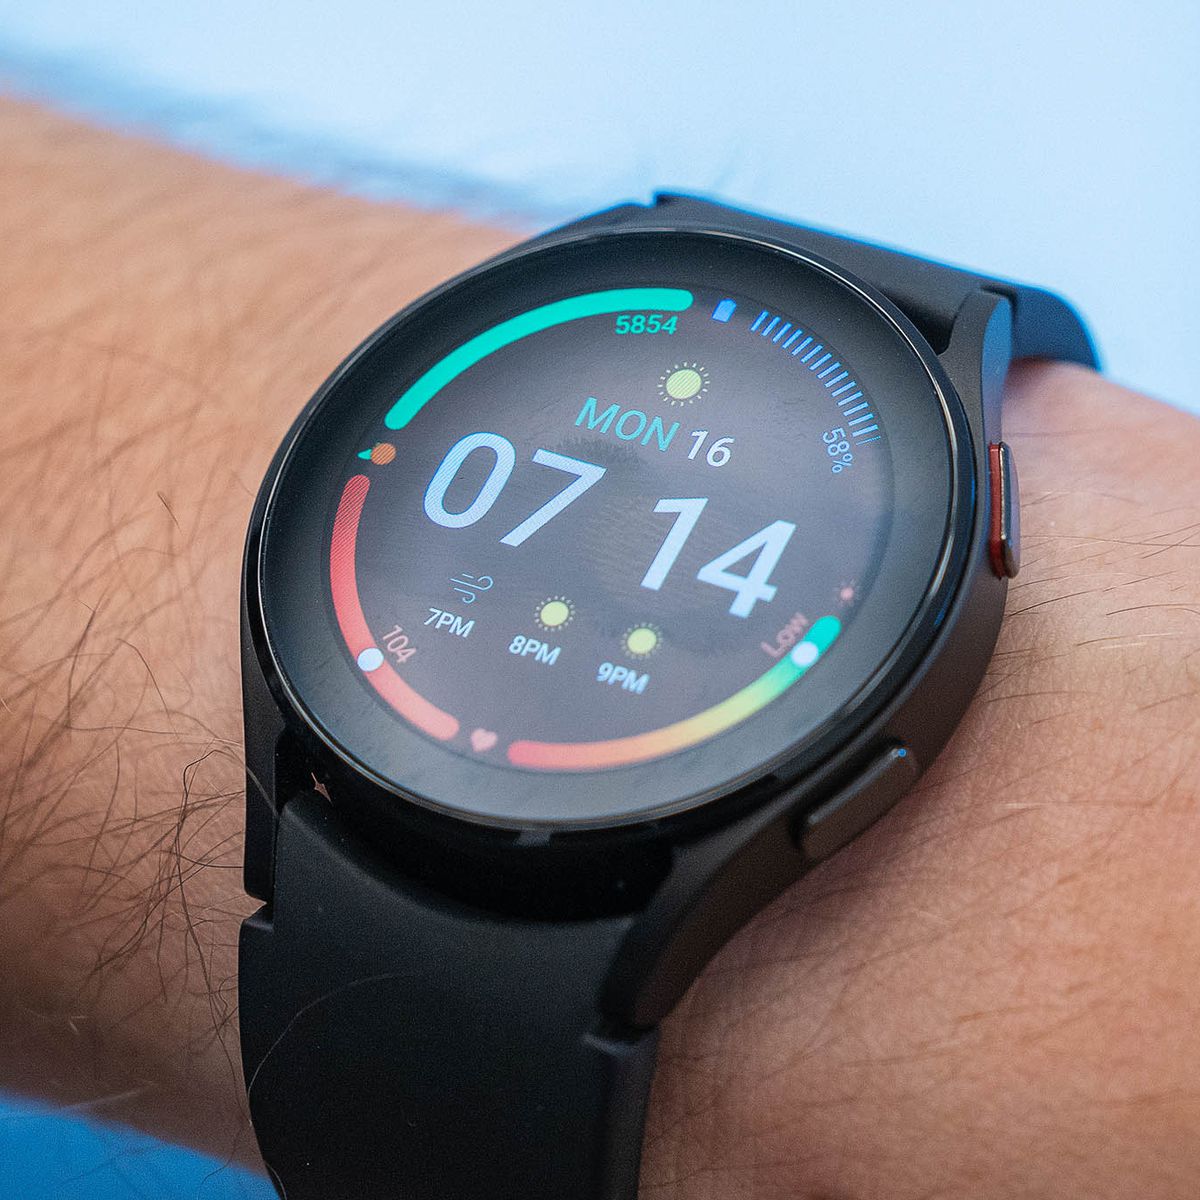 The regular Galaxy Watch 4 has a touch-sensitive bezel, which is fiddly.